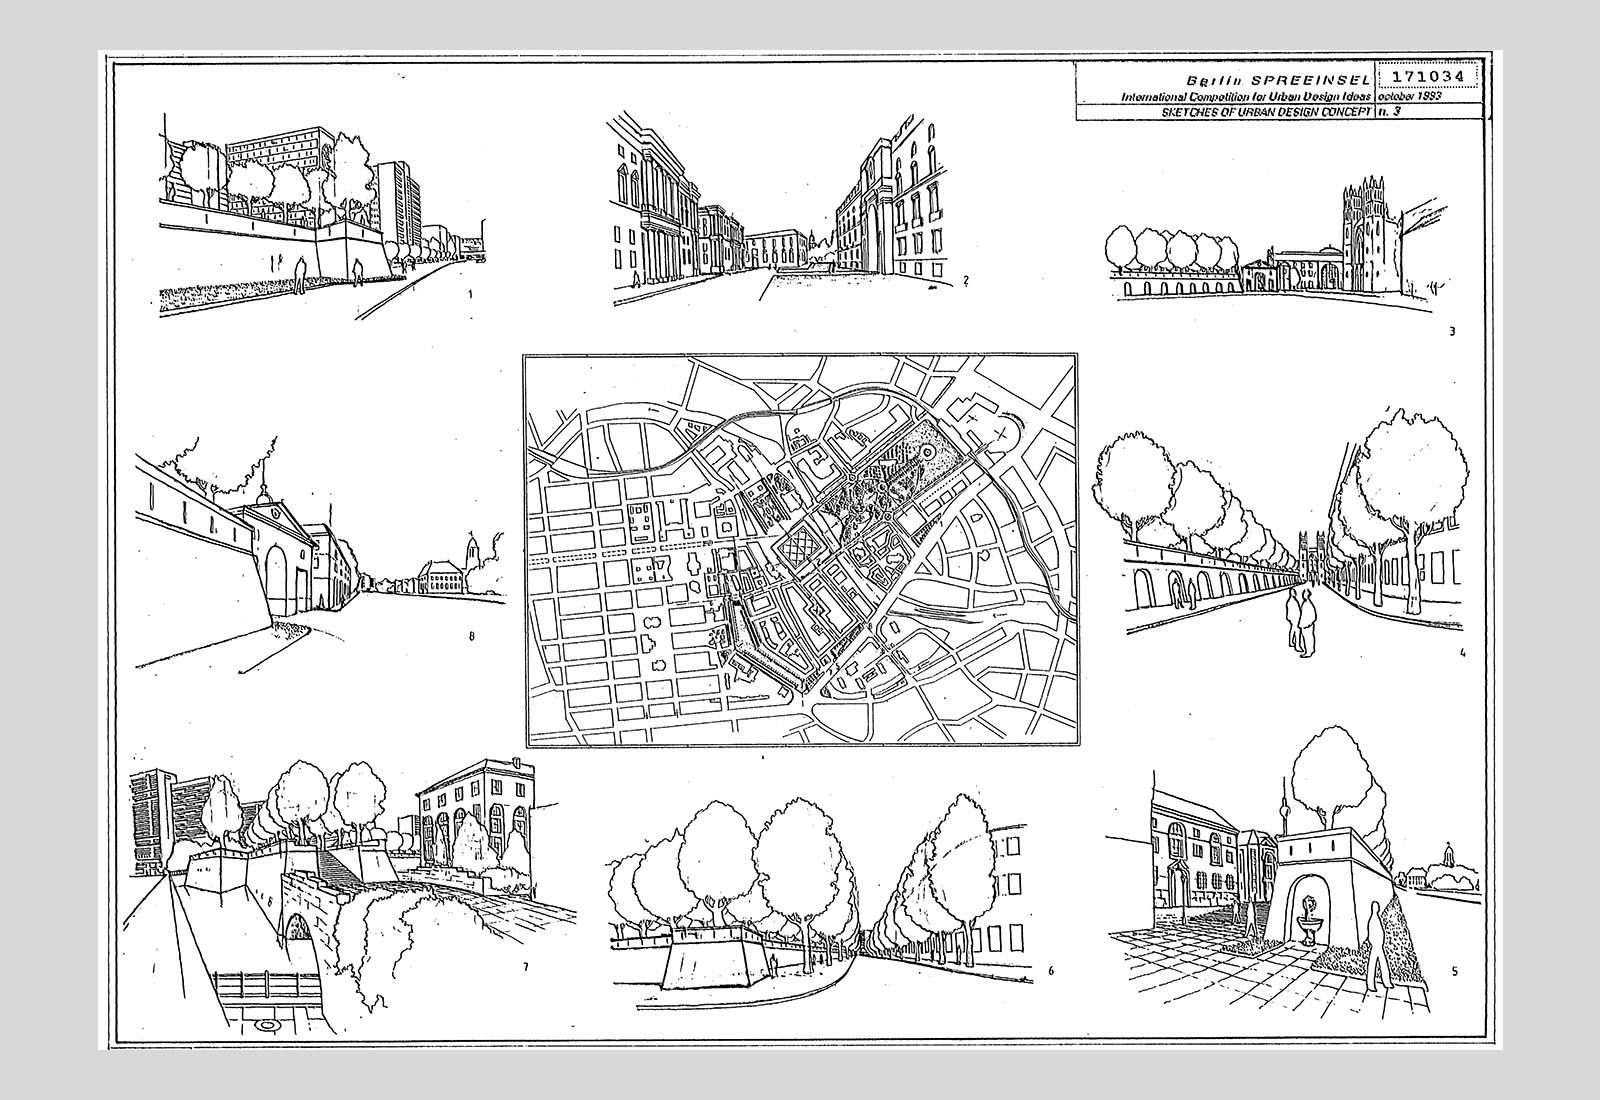 Berlin Spreeinsel project in Berlin - Drawing No. 3 of the contest